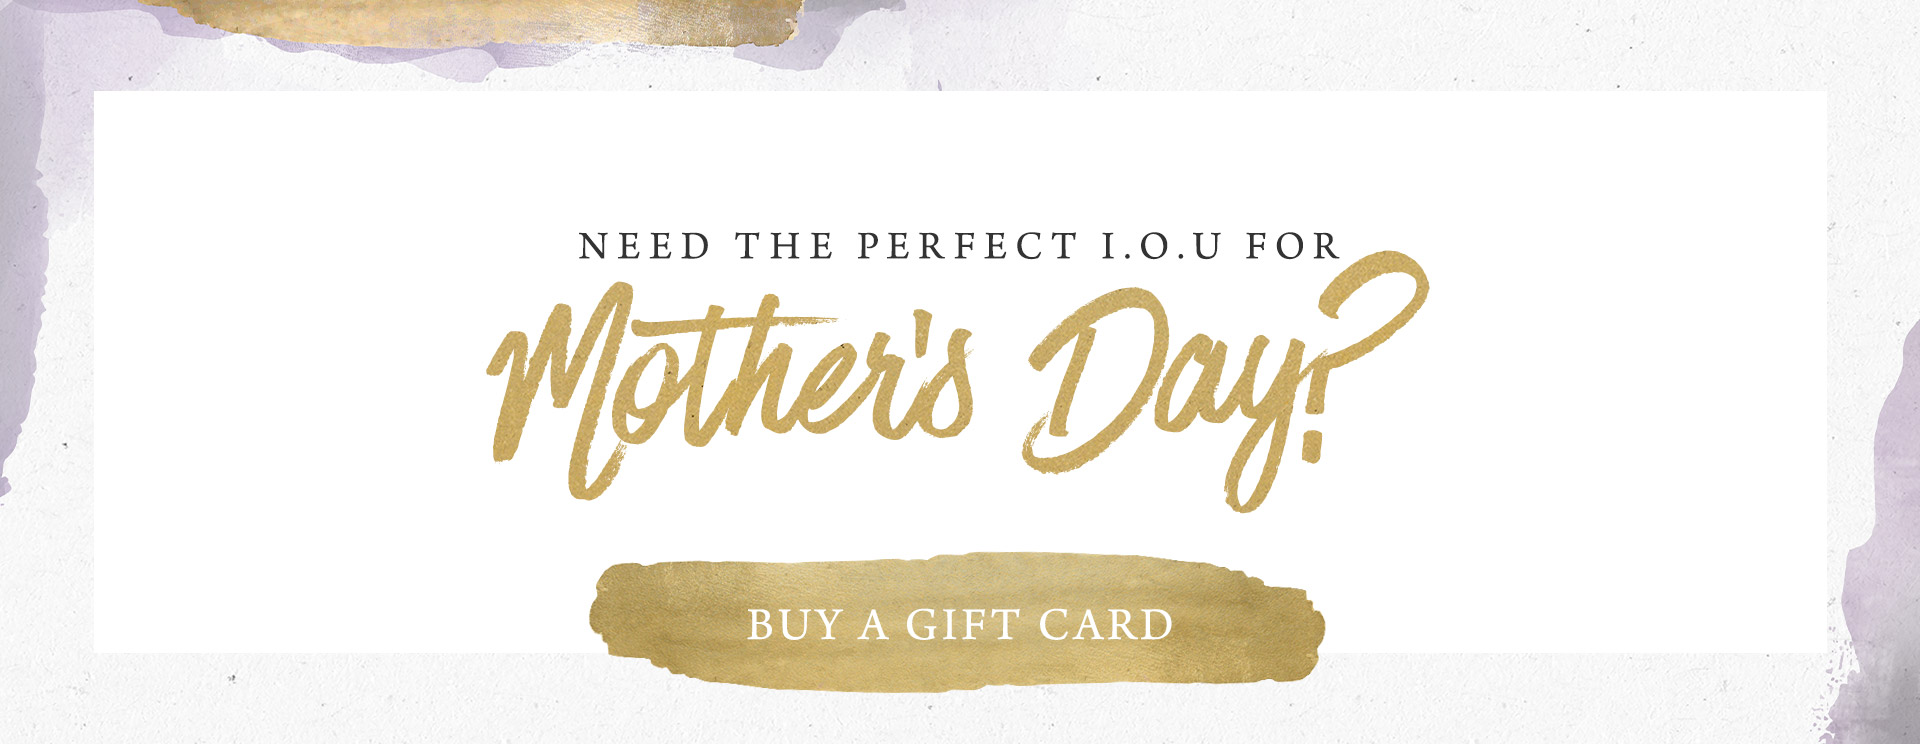 Mother's Day 2019 at The Golden Heart